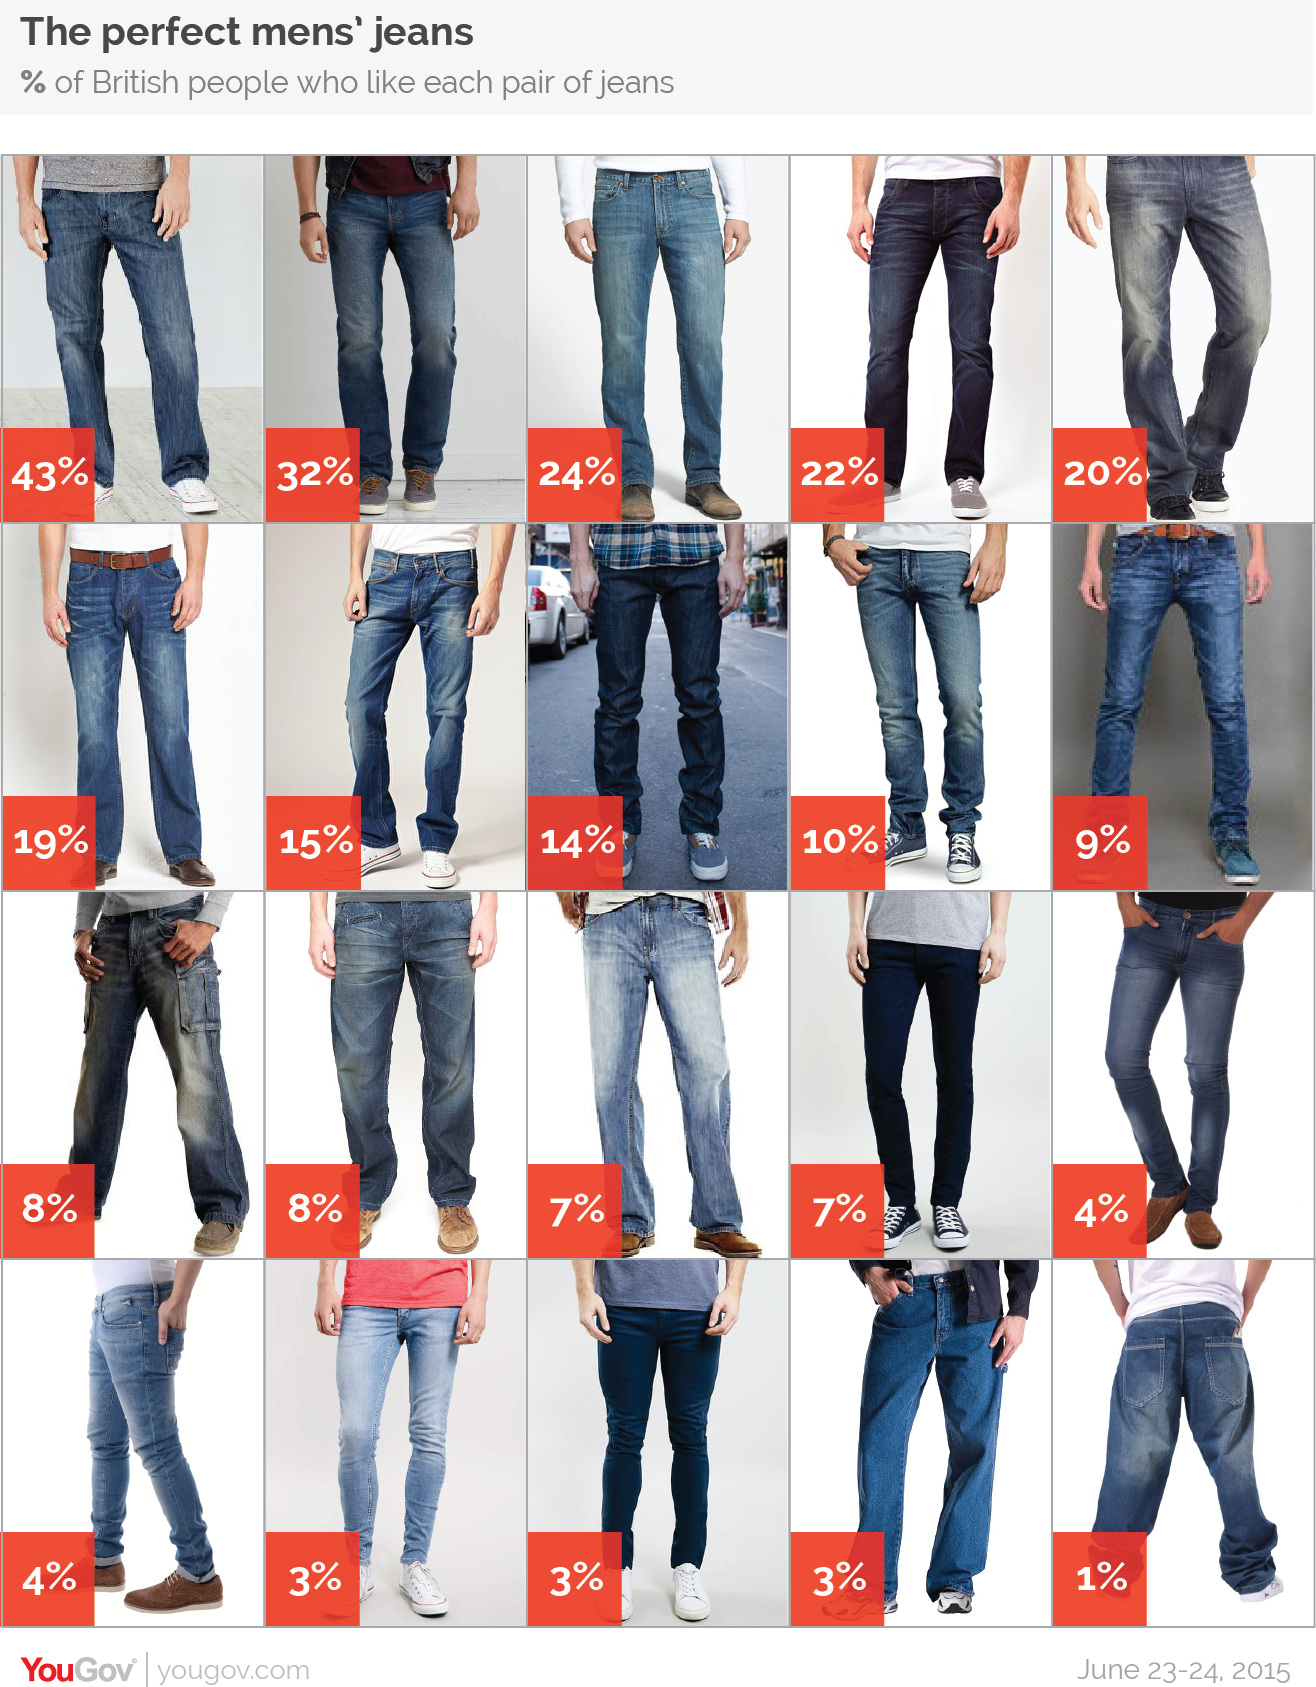 Revealed: the perfect mens' jeans | YouGov